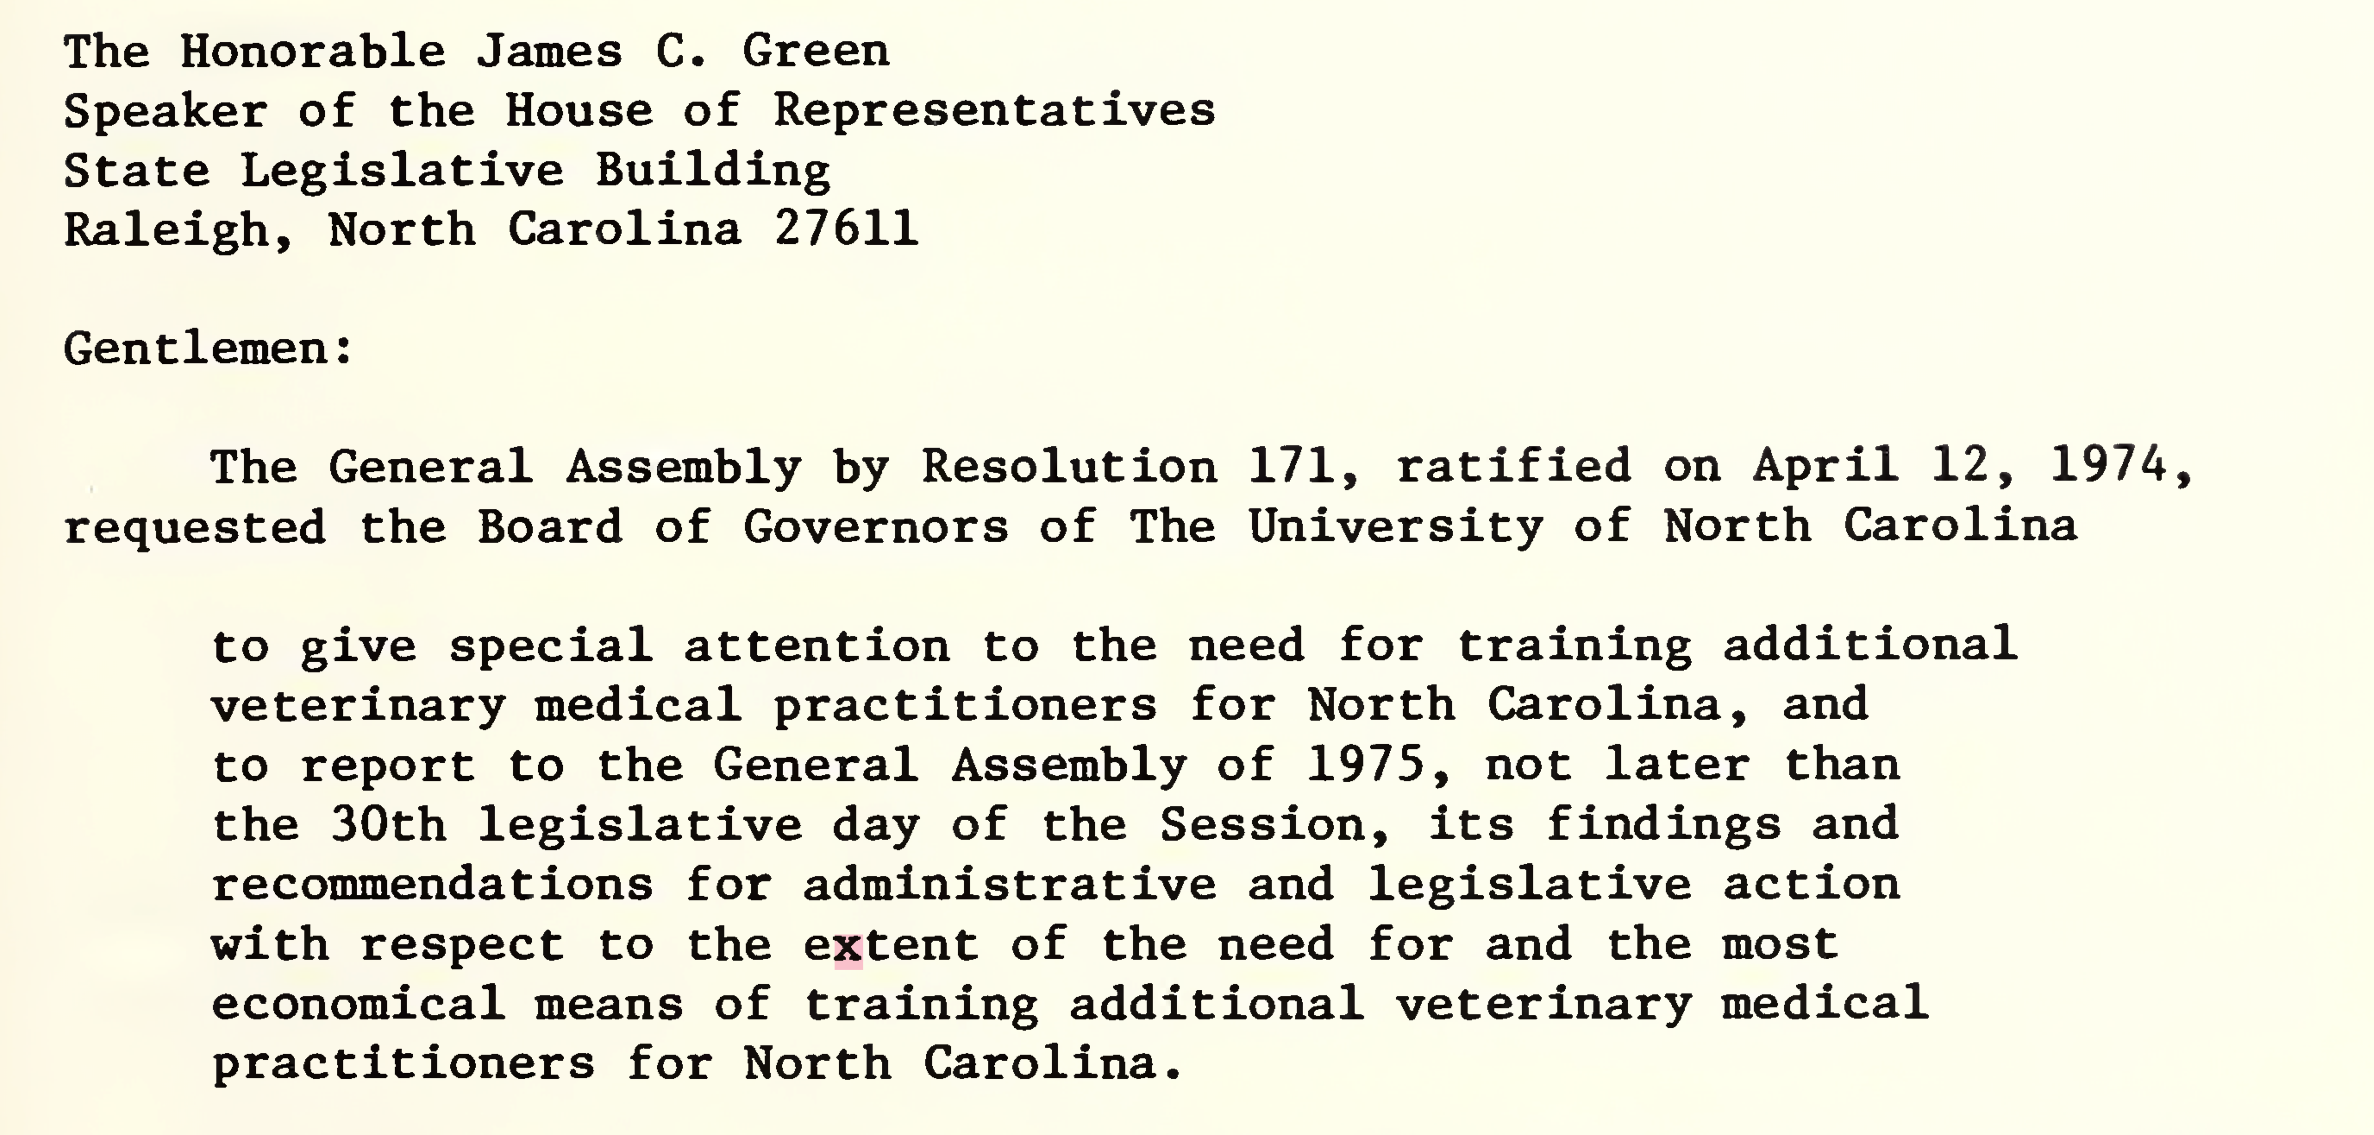 Veterinary Medical Education in North Carolina: A Special Report to the General Assembly, December 18, 1974